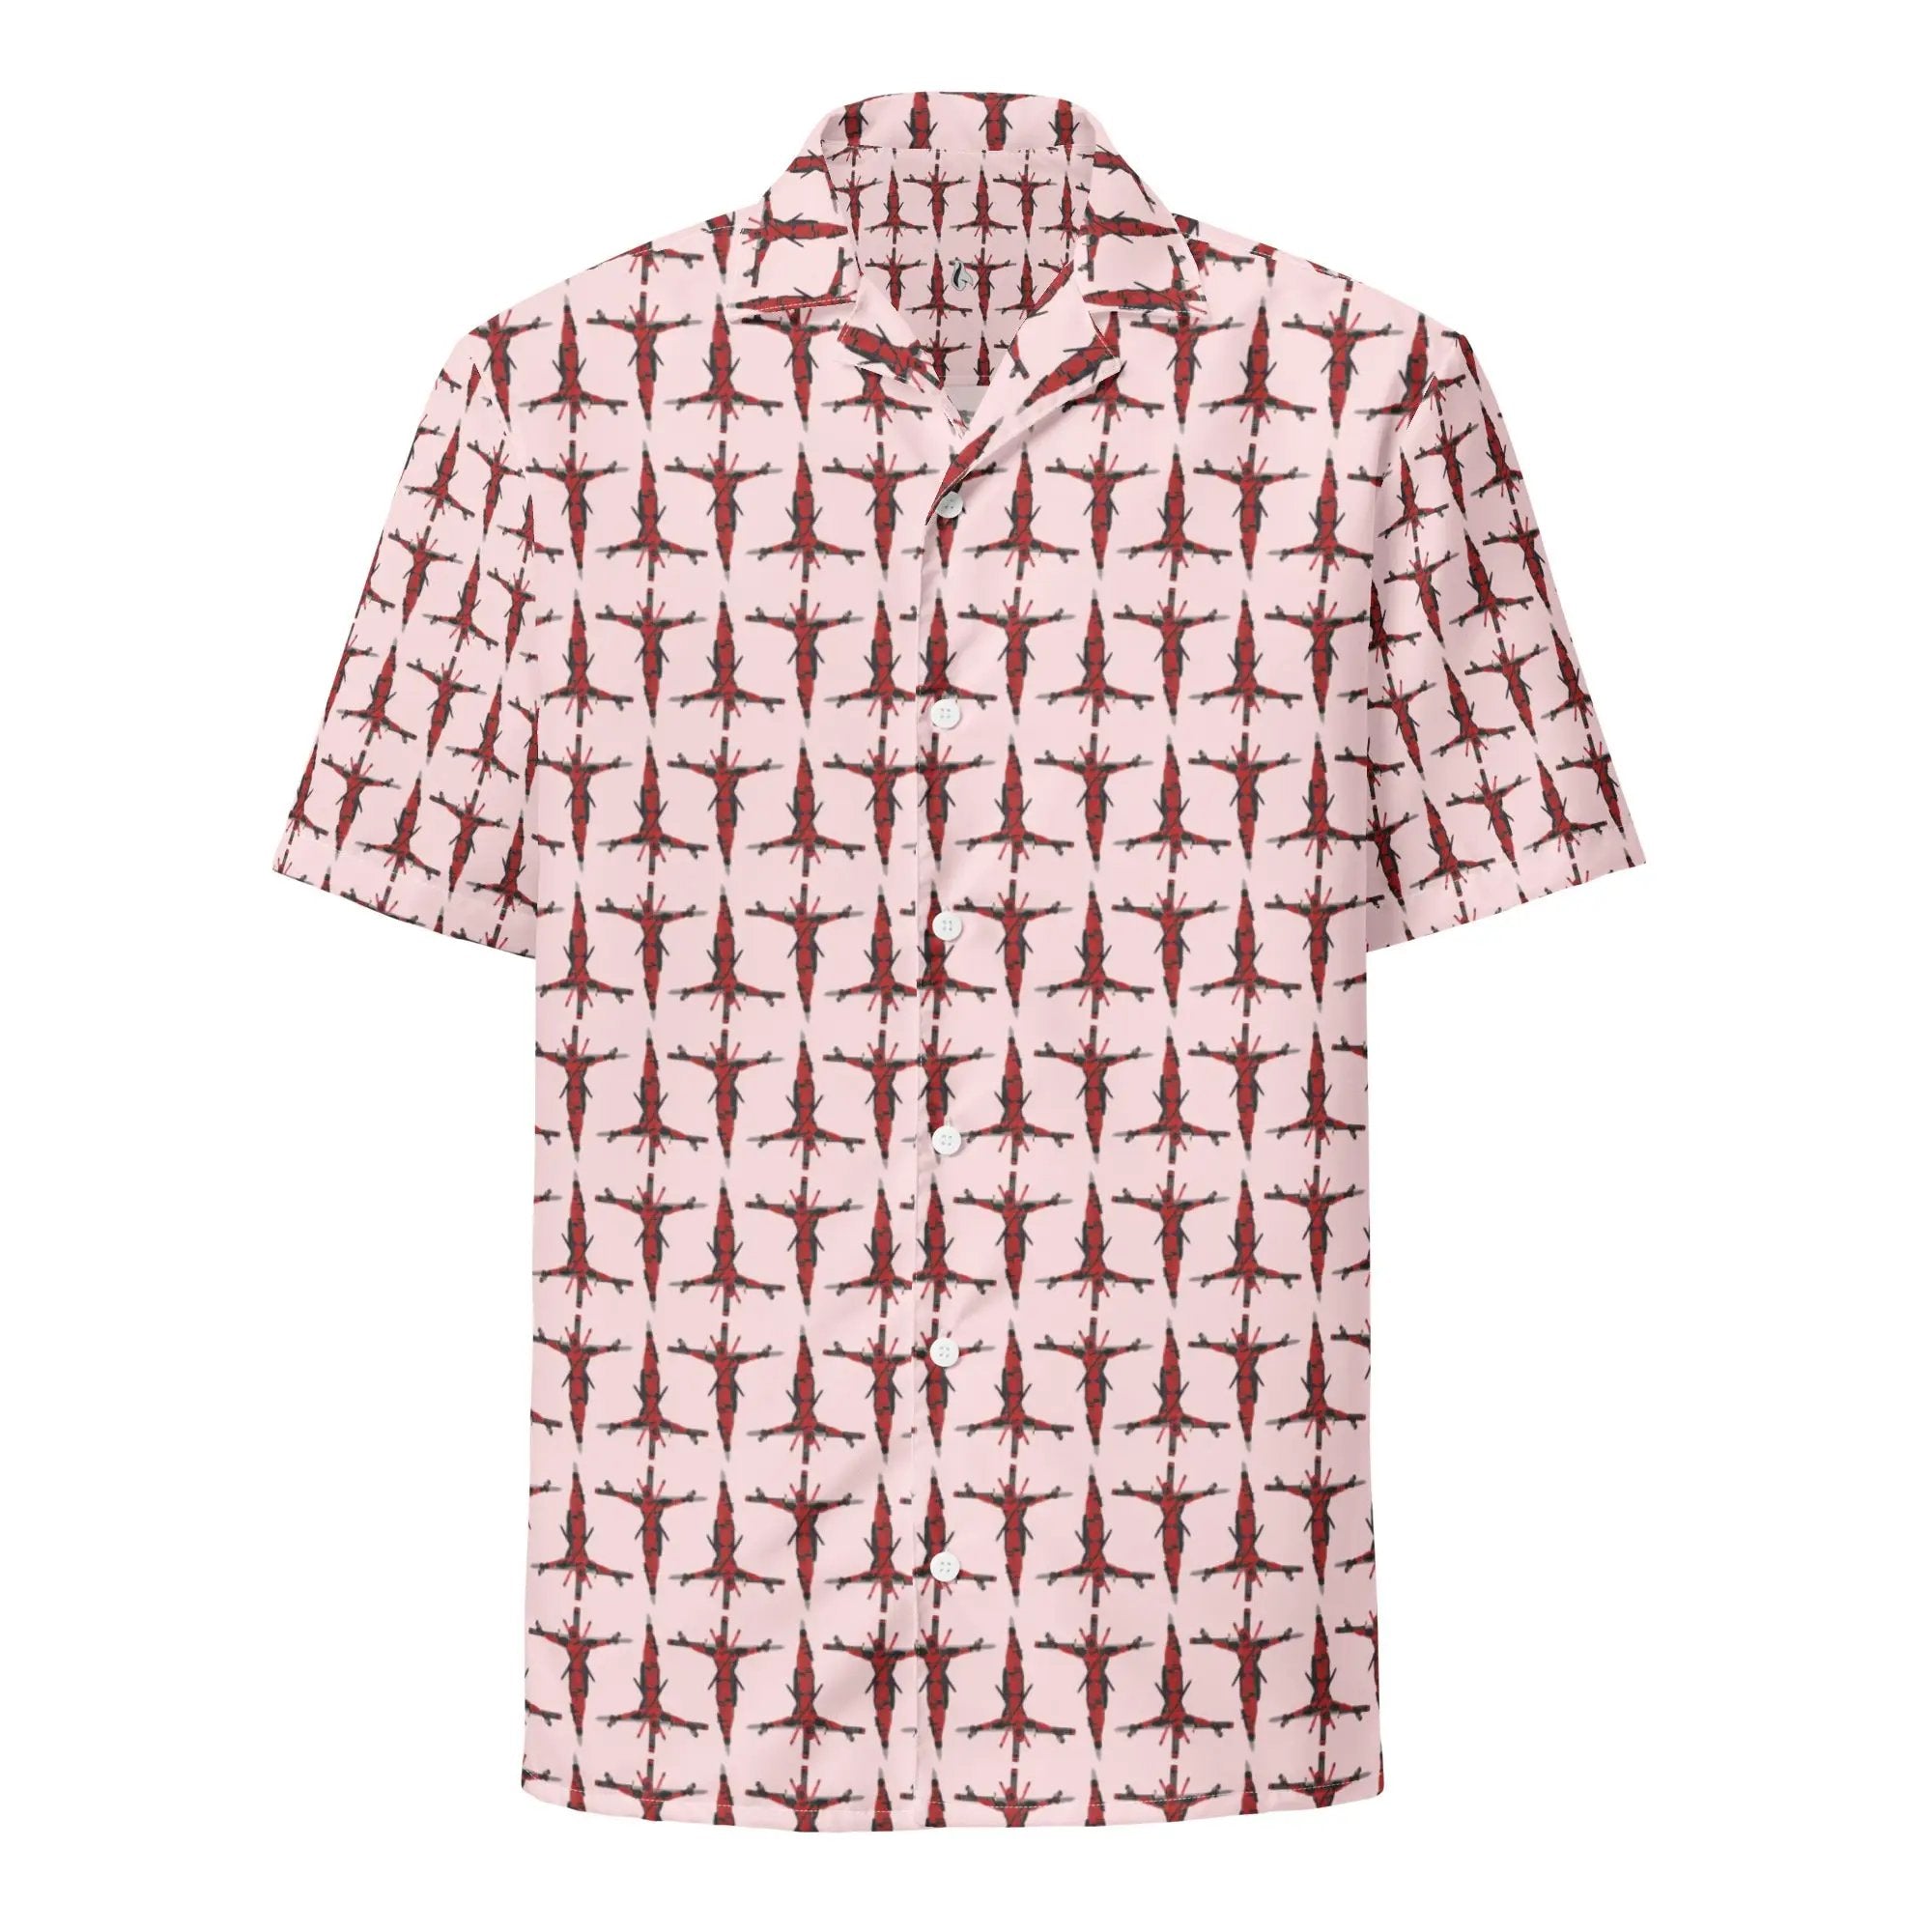 a red and white shirt with a pattern on it